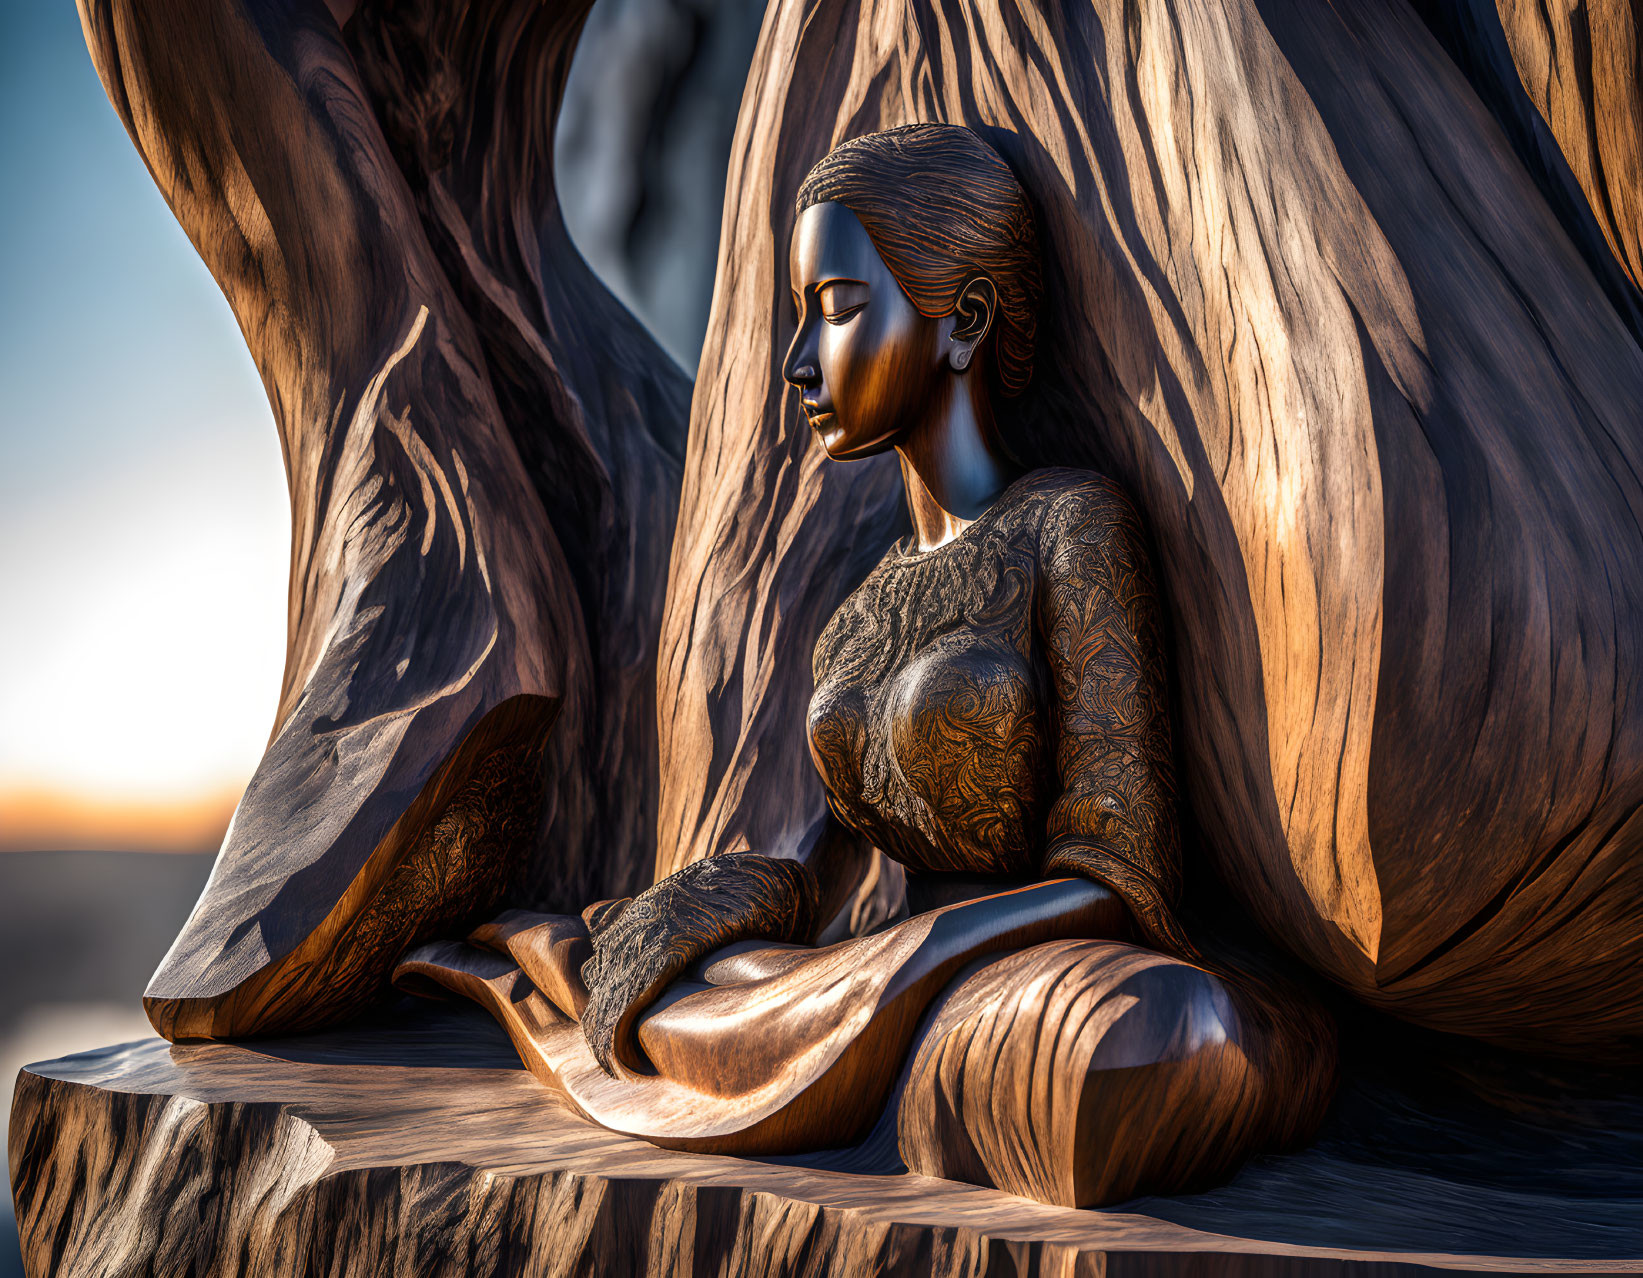 Bronze statue of woman in intricate textures, surrounded by wood